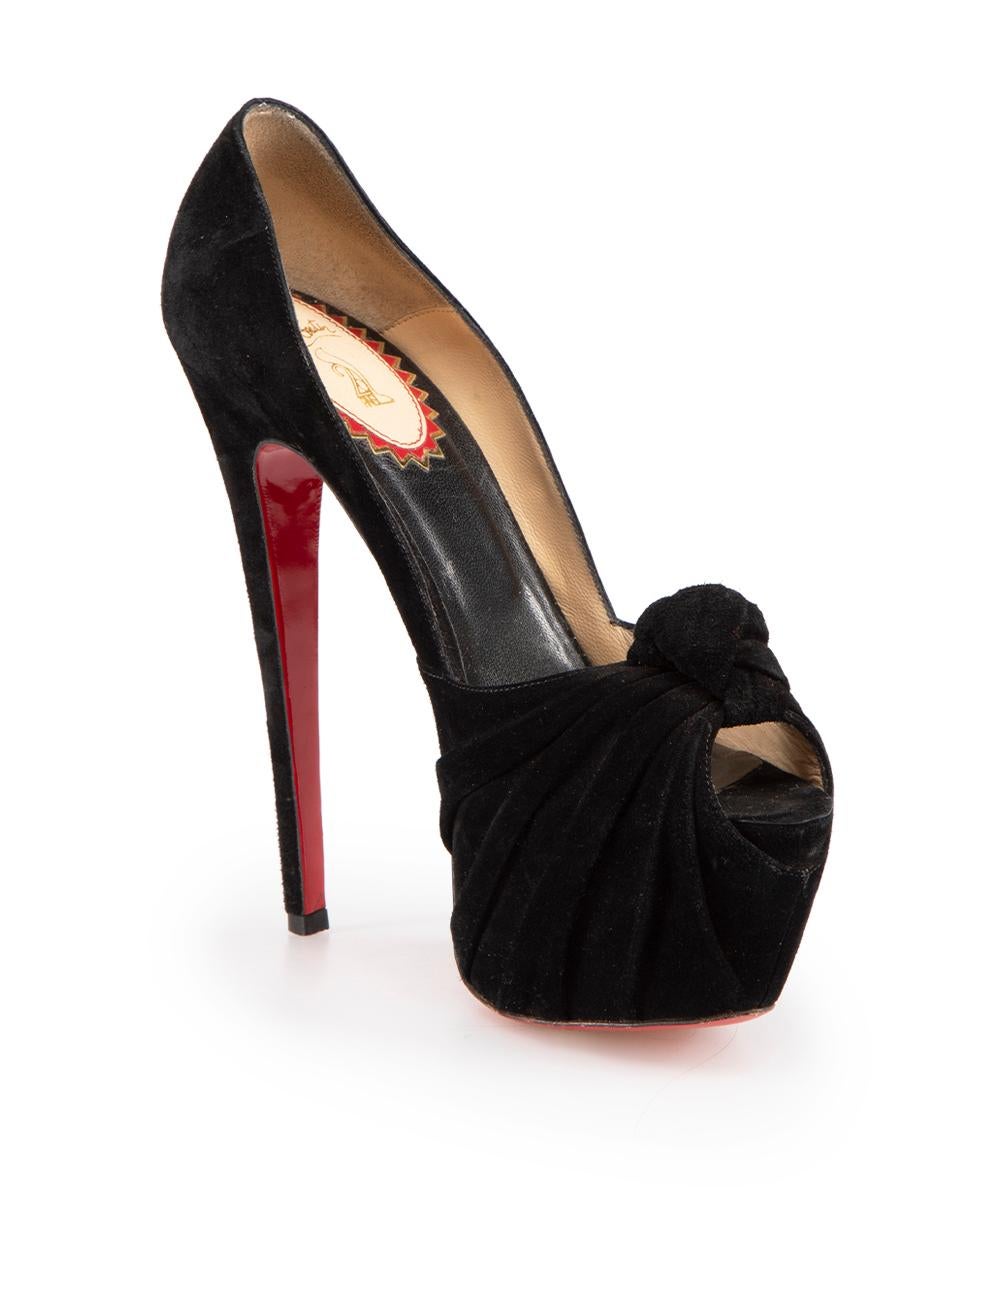 CONDITION is Very good. Minimal wear to heels is evident. Minimal pilling to overall suede, abrasion and scratches is evident to the back of heel on this used Christian Louboutin designer resale item. This item comes with original dust